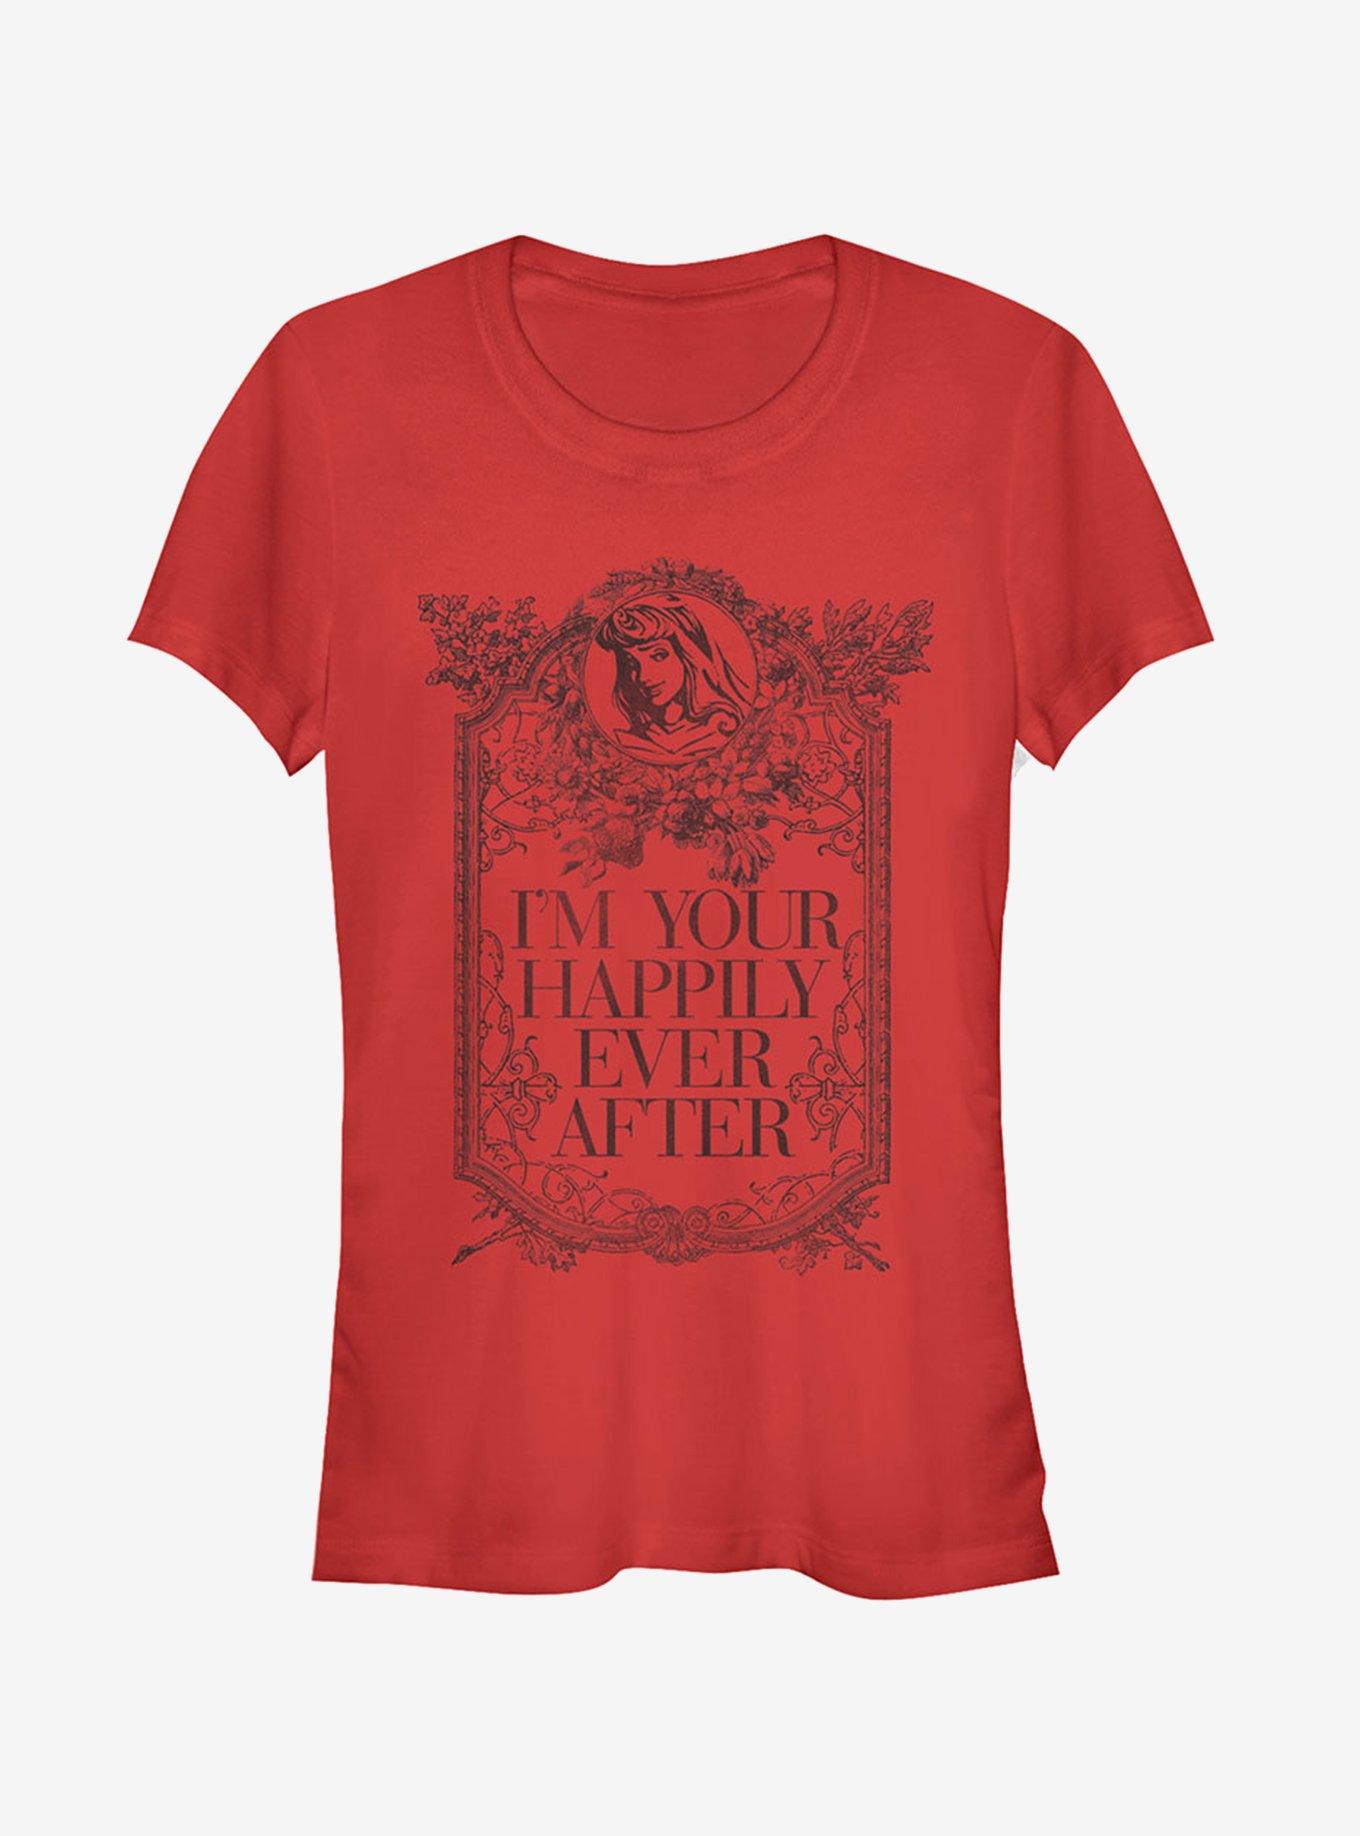 Disney Happily Ever After Girls T-Shirt - RED | Hot Topic